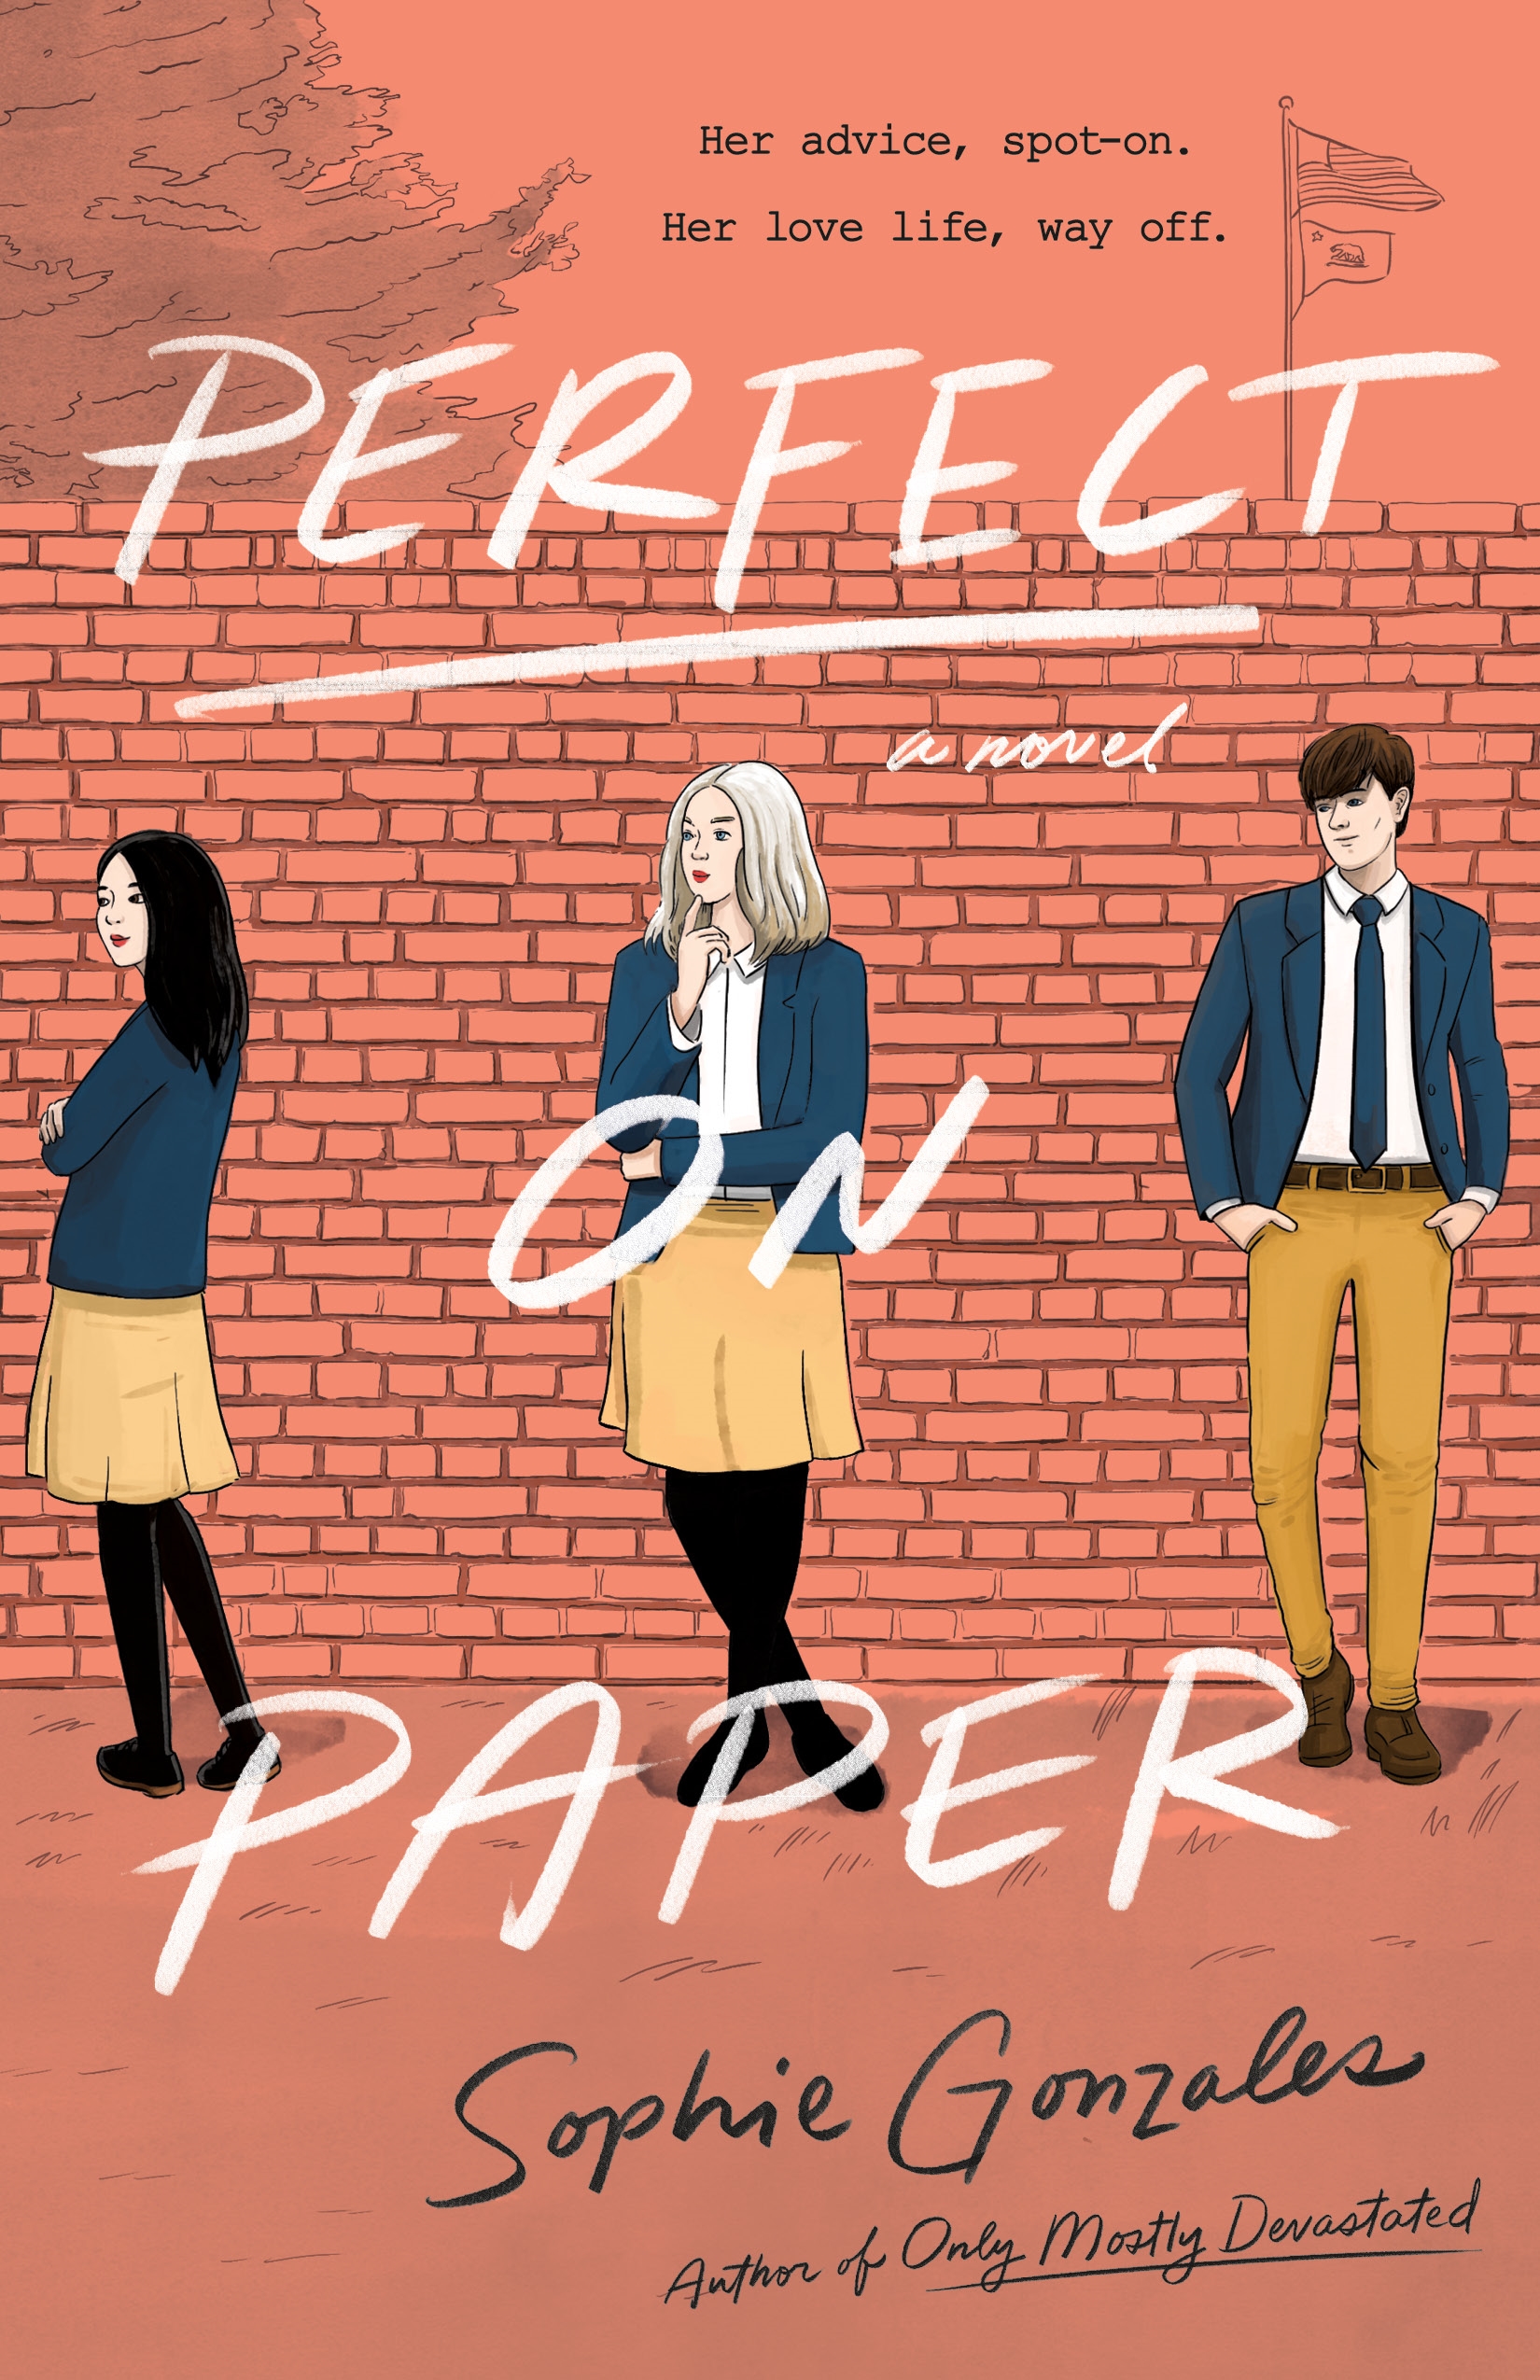 Book “Perfect on Paper” by Sophie Gonzales — March 9, 2021